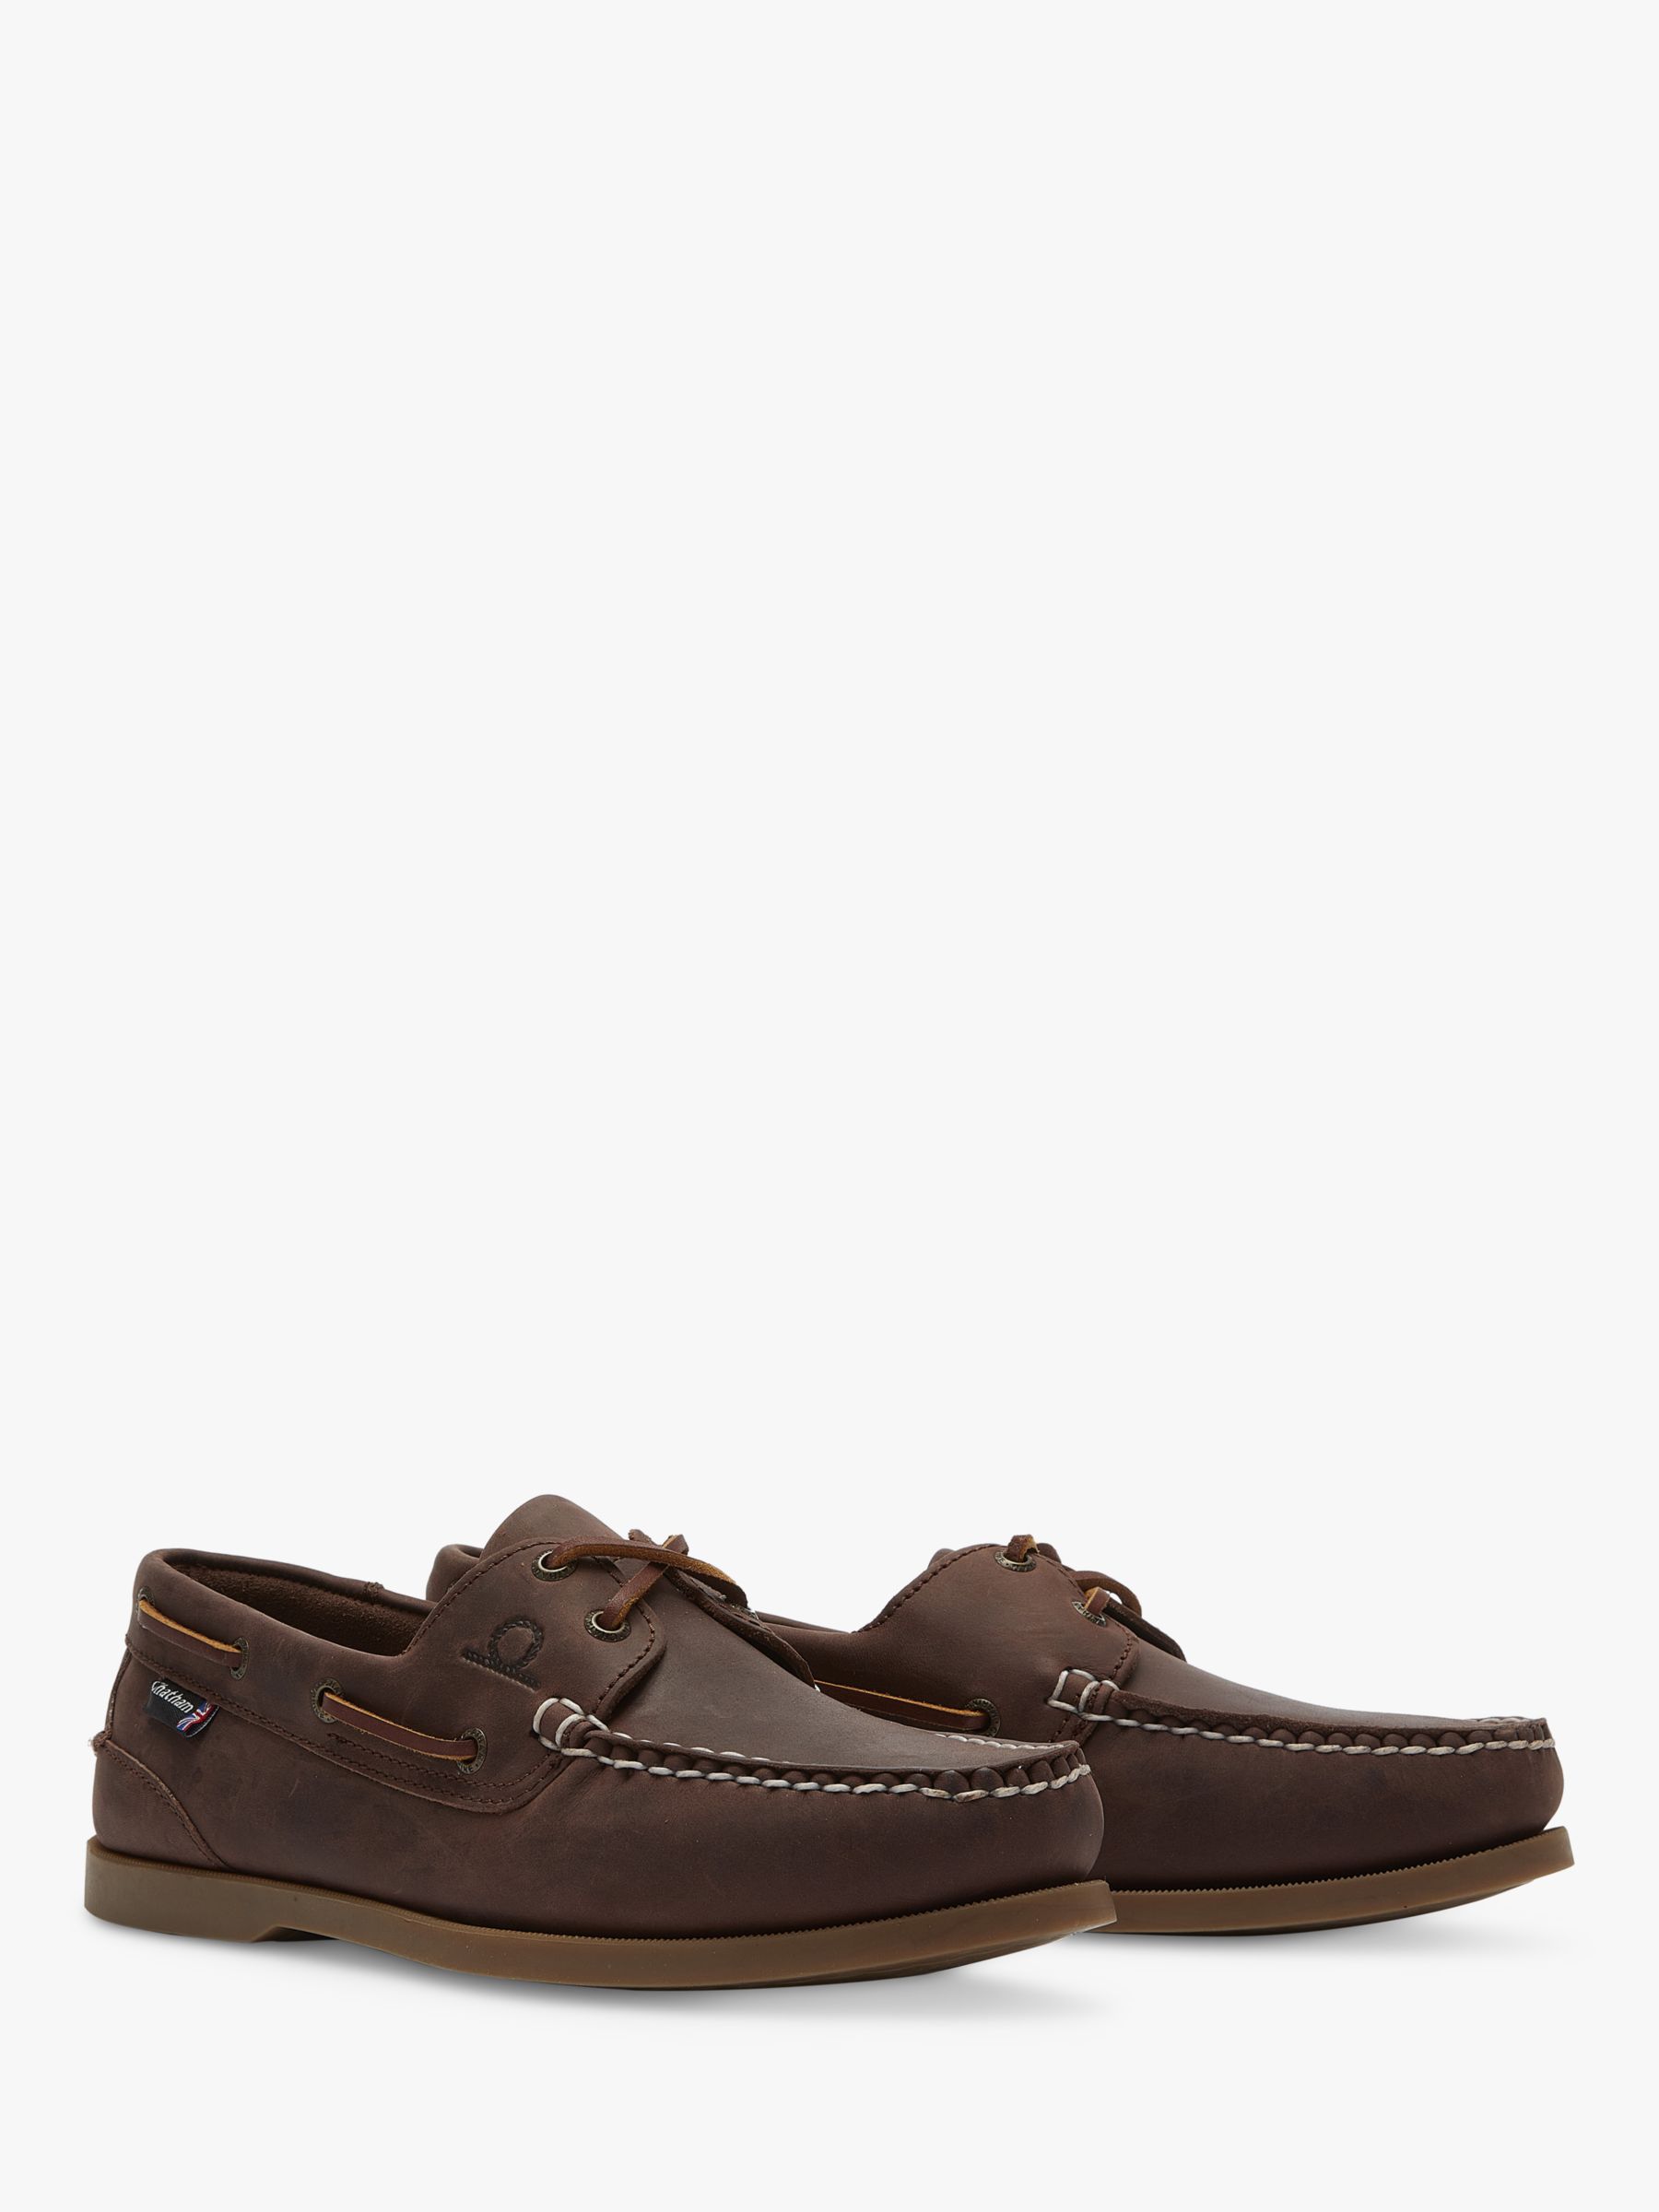 Chatham Deck II G2 Leather Boat Shoes, Chocolate, 7